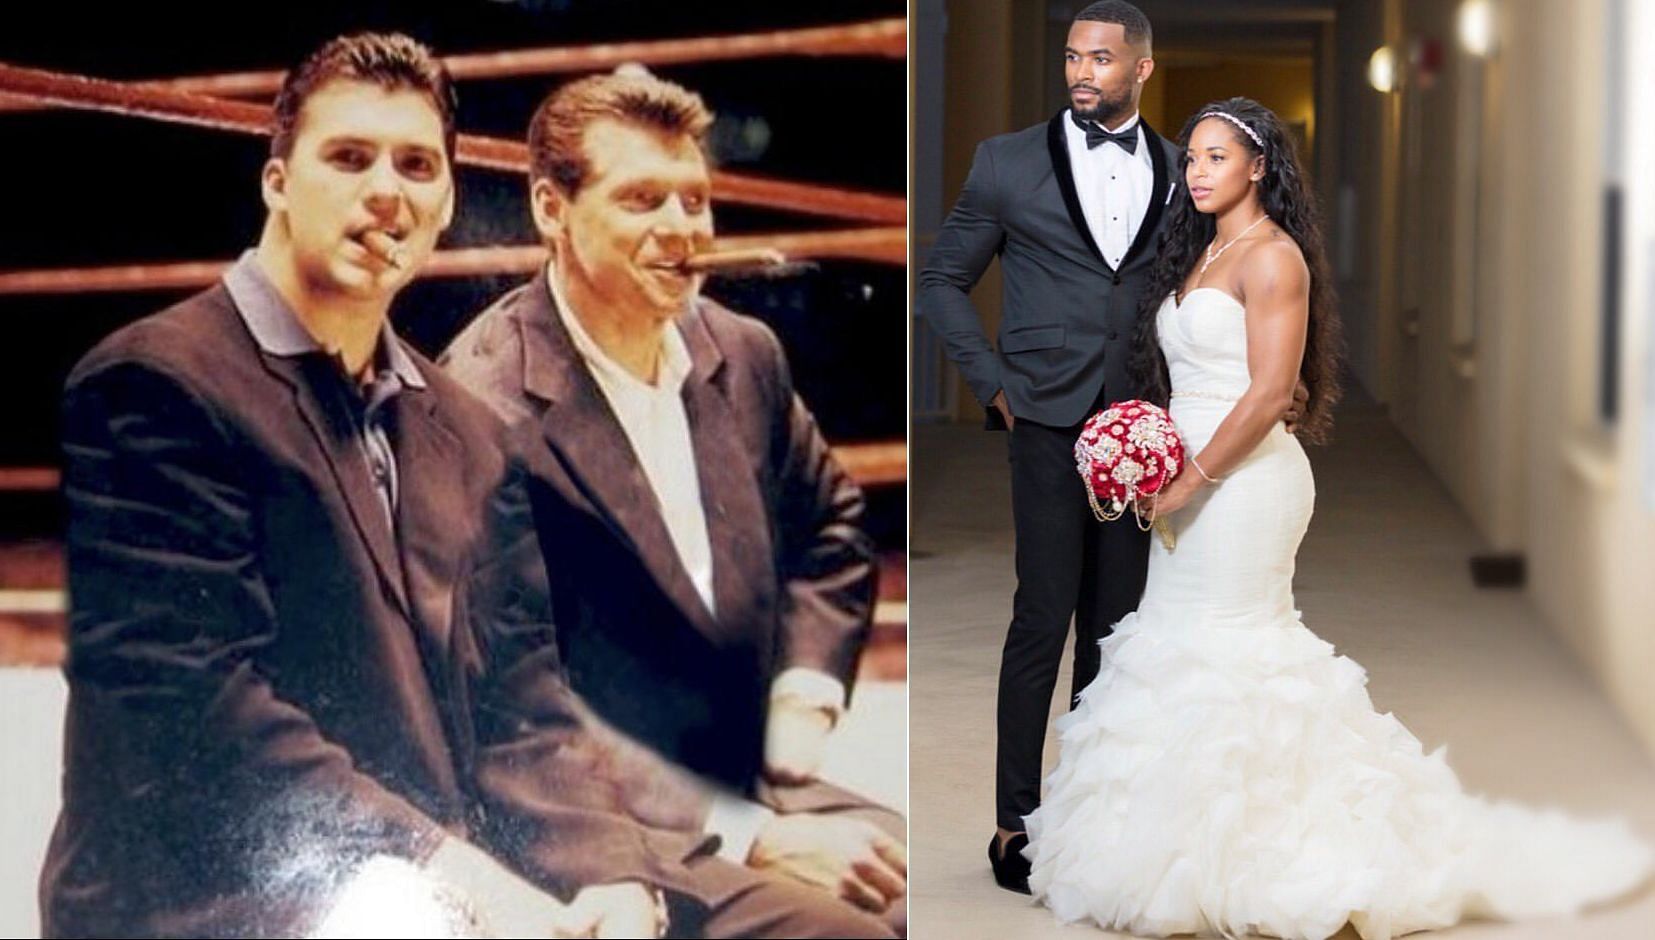 Several superstars have been asked to be best man at wrestling weddings